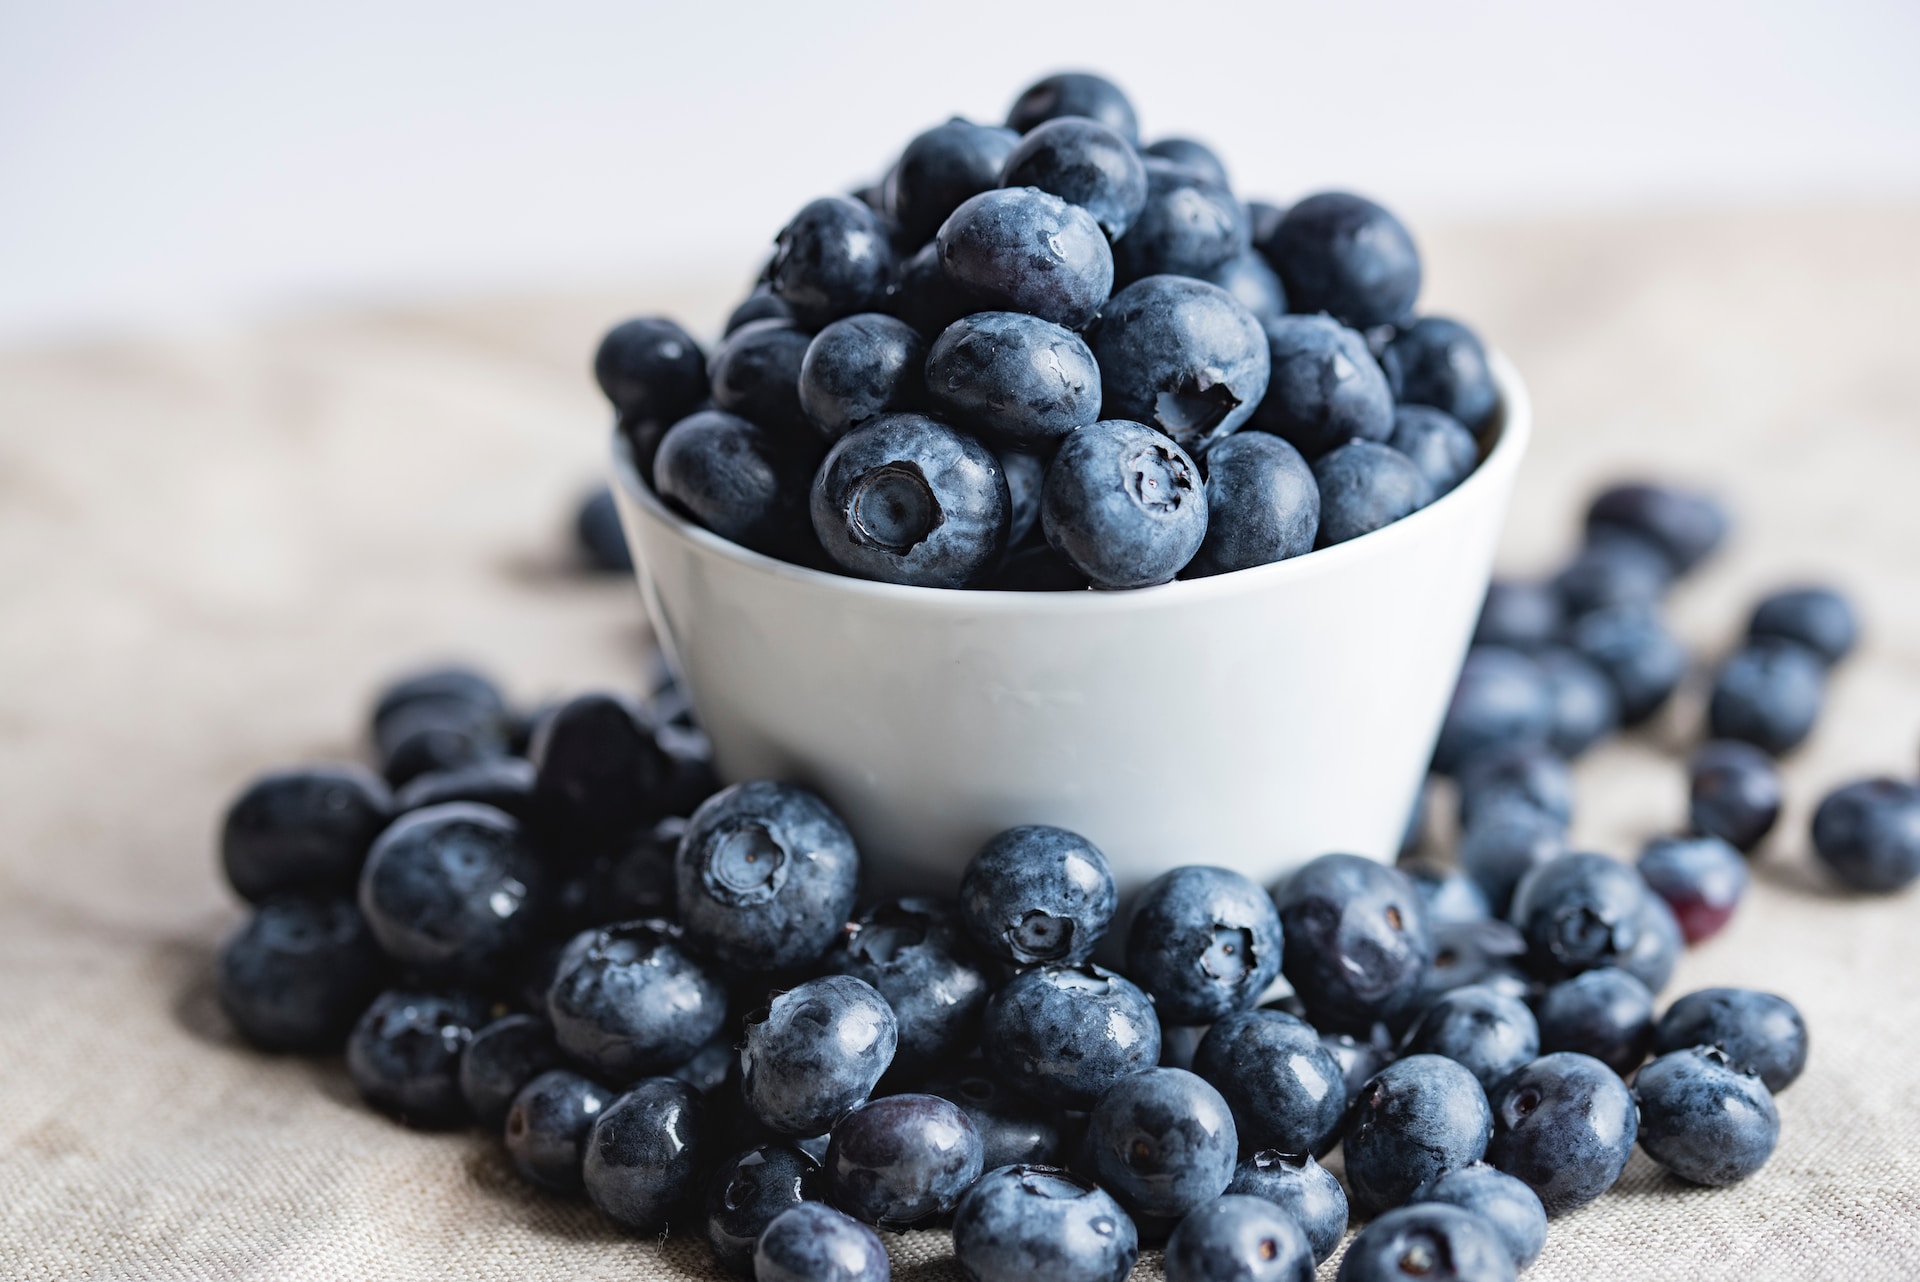 Blueberries are delicious but stain your teeth